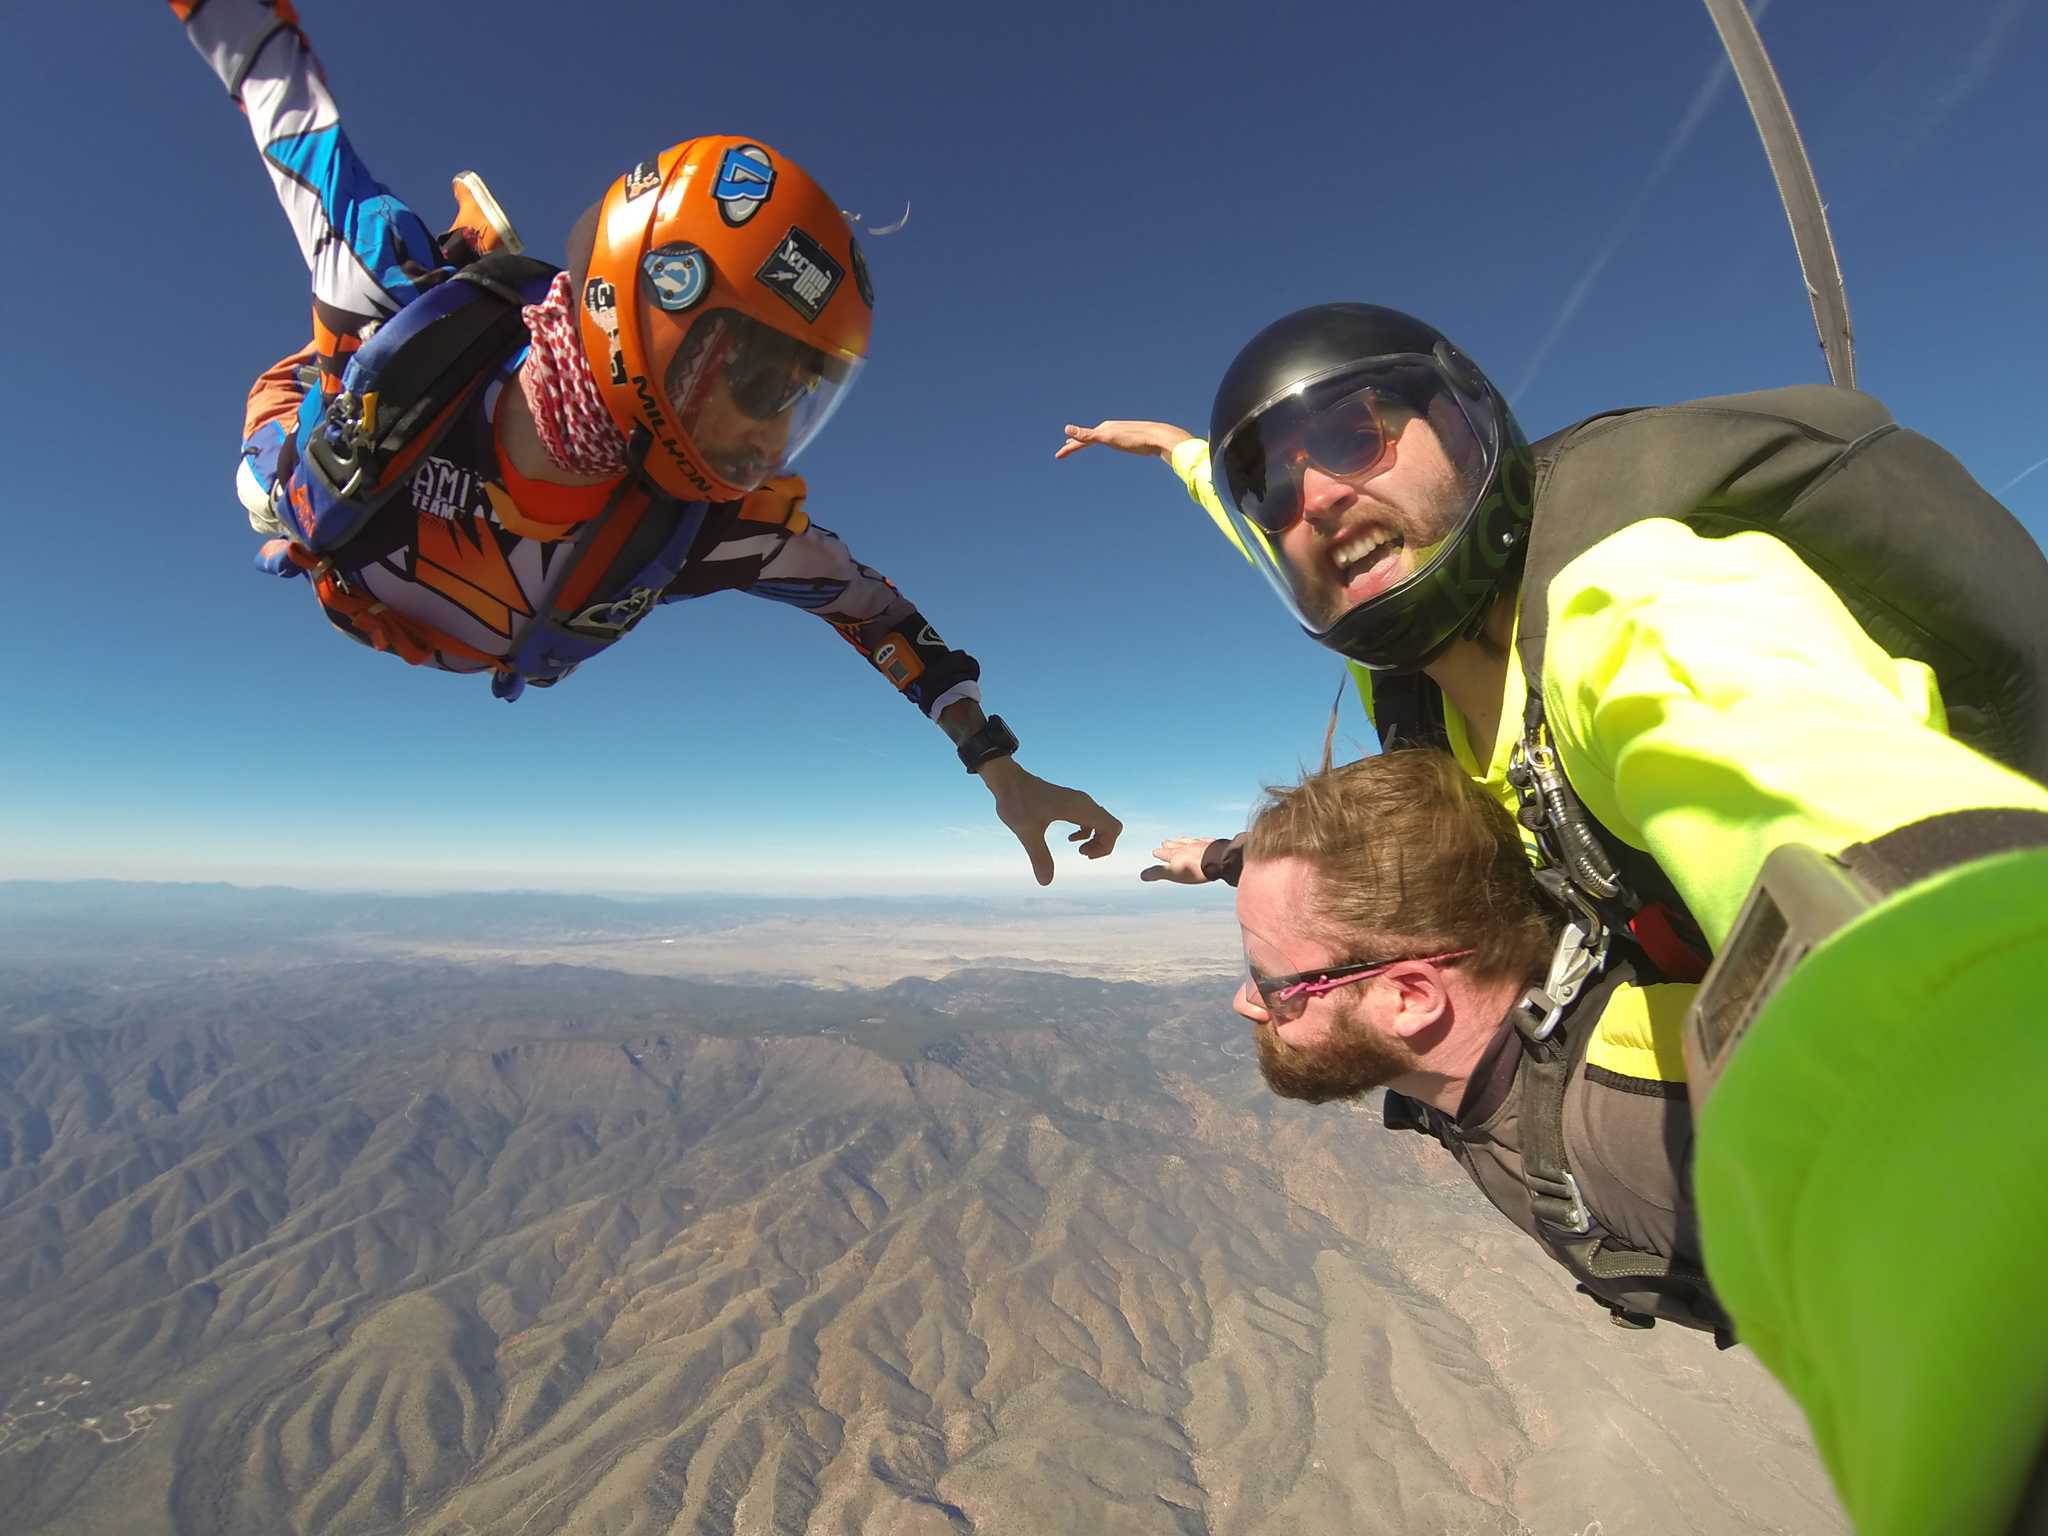 Just a bit of skydiving